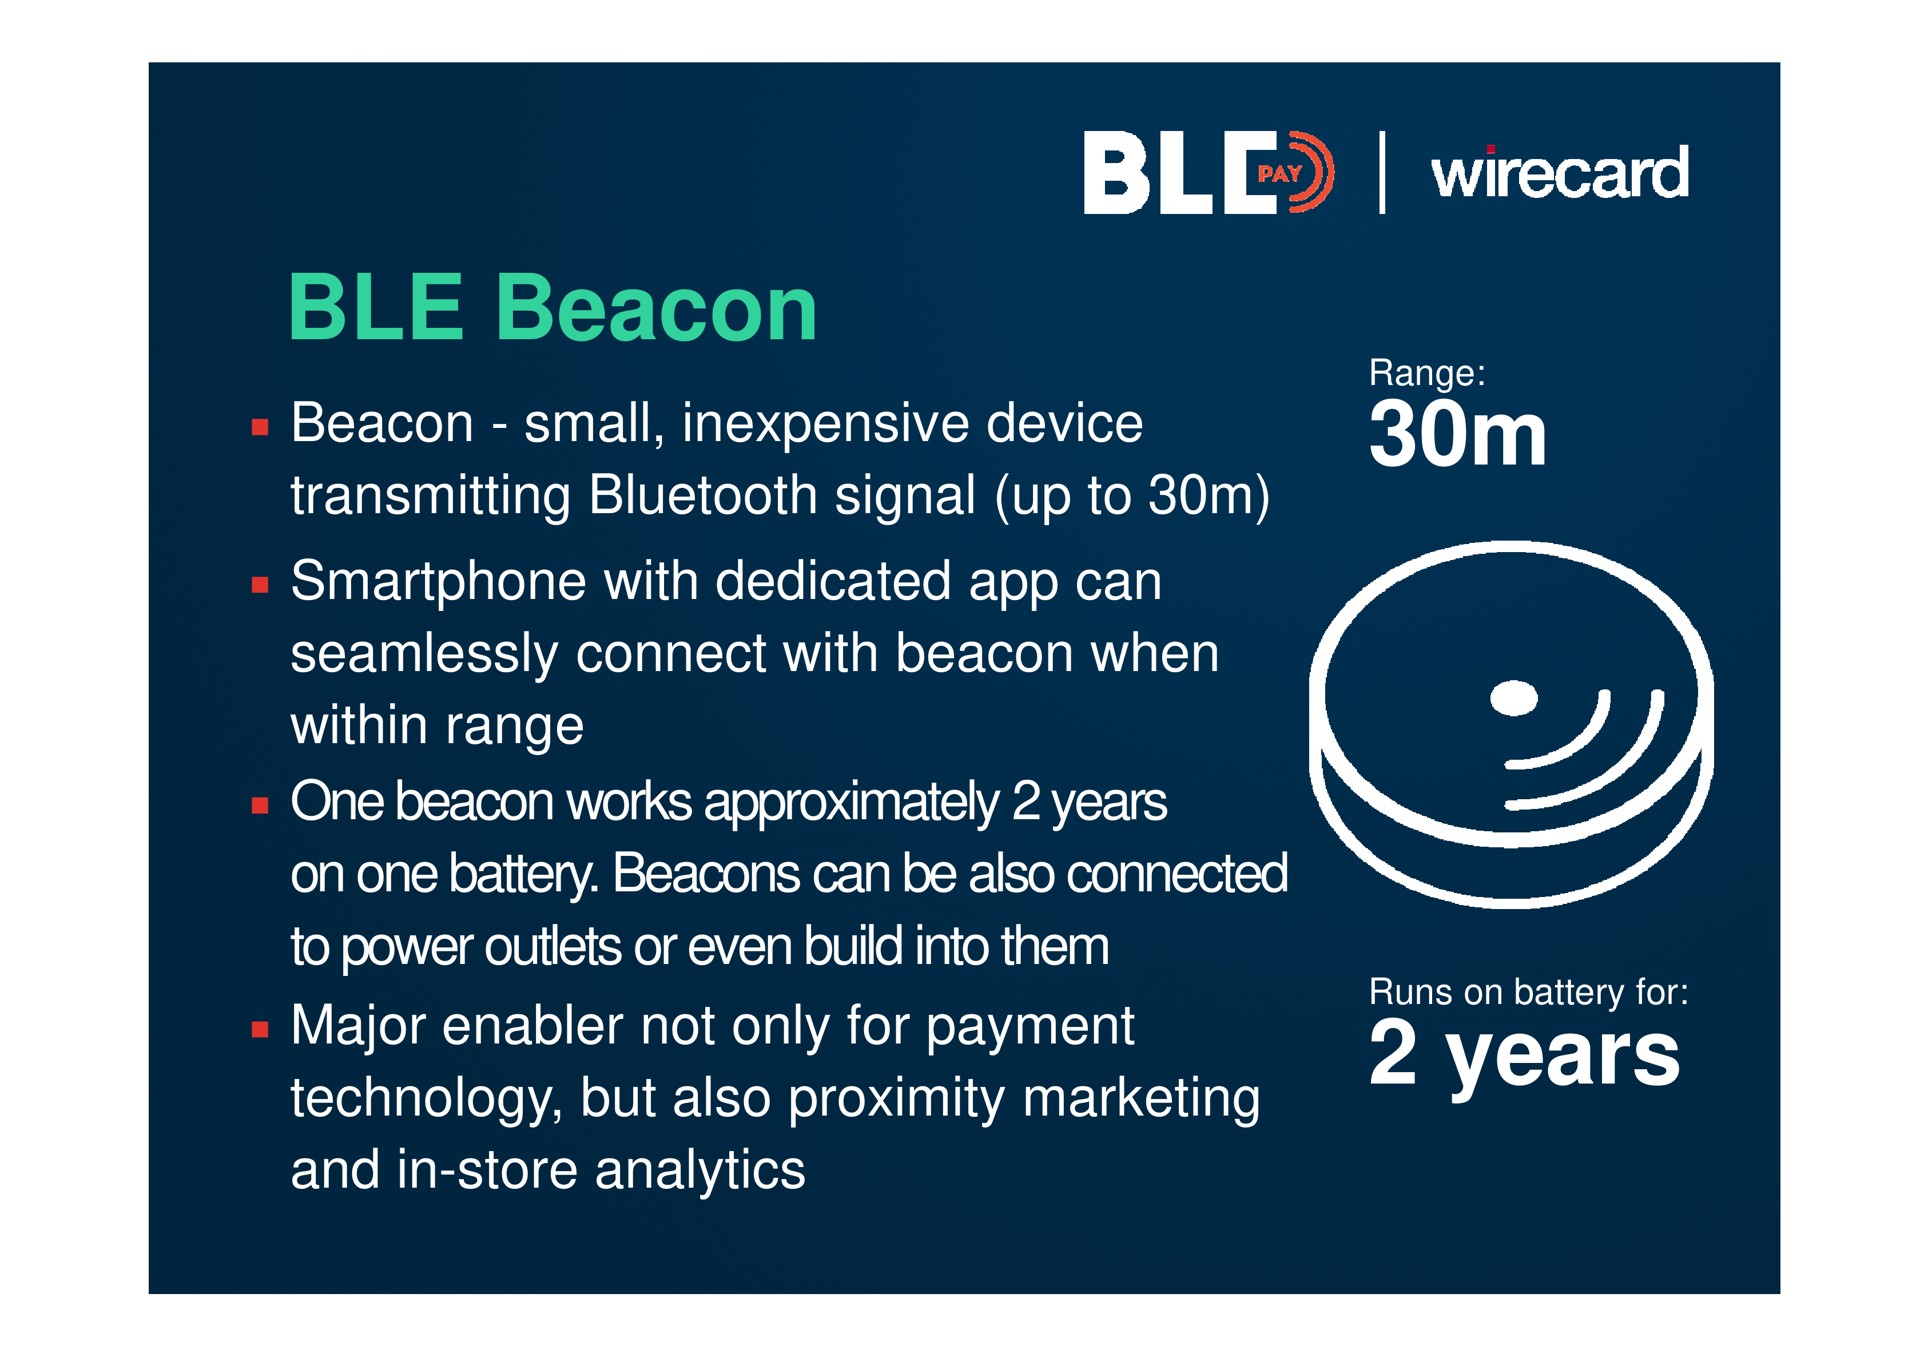 beacon beacon small inexpensive device transmitting signal up to with dedicated can seamlessly connect with beacon when within range one beacon works approximately years on one battery beacons can be also connected to power outlets or even build into them major enabler not only for payment technology but also proximity marketing and in store analytics years a | Wirecard